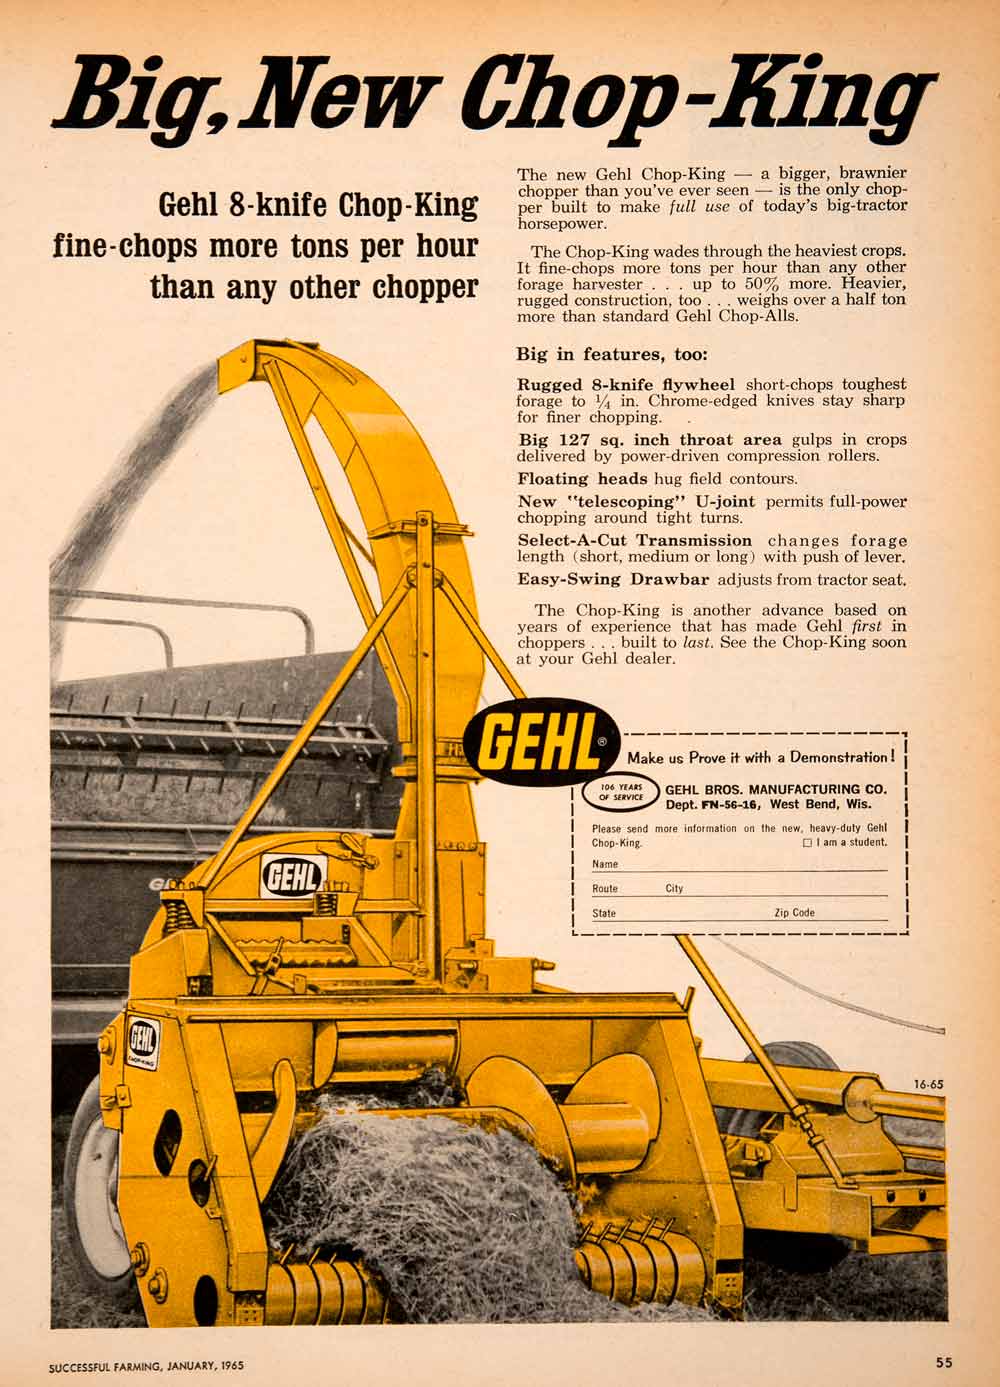 1965 Ad Gehl Brothers Manufacturing West Bend Wisconsin Chop-King Chopper SF4